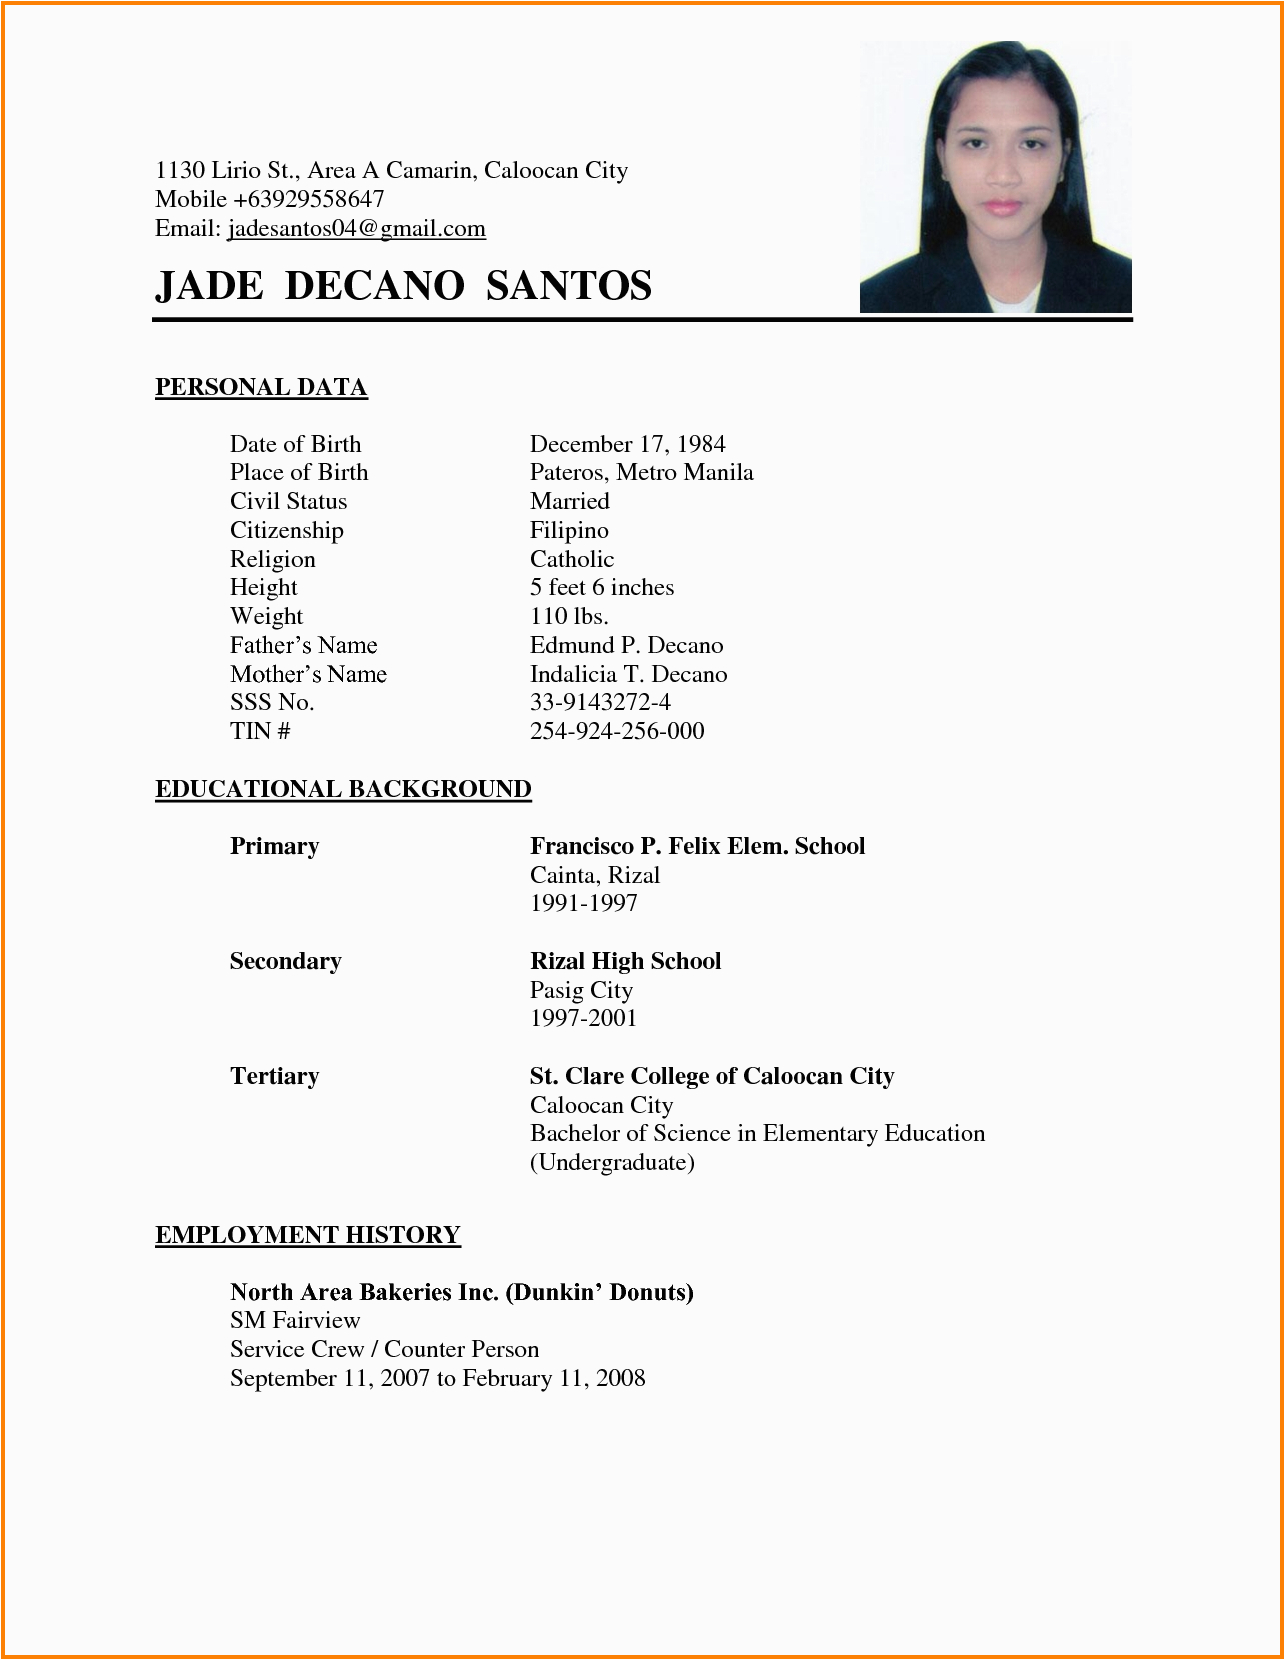 Sample Resume Philippines with Work Experience Simple Resume Sample Philippines